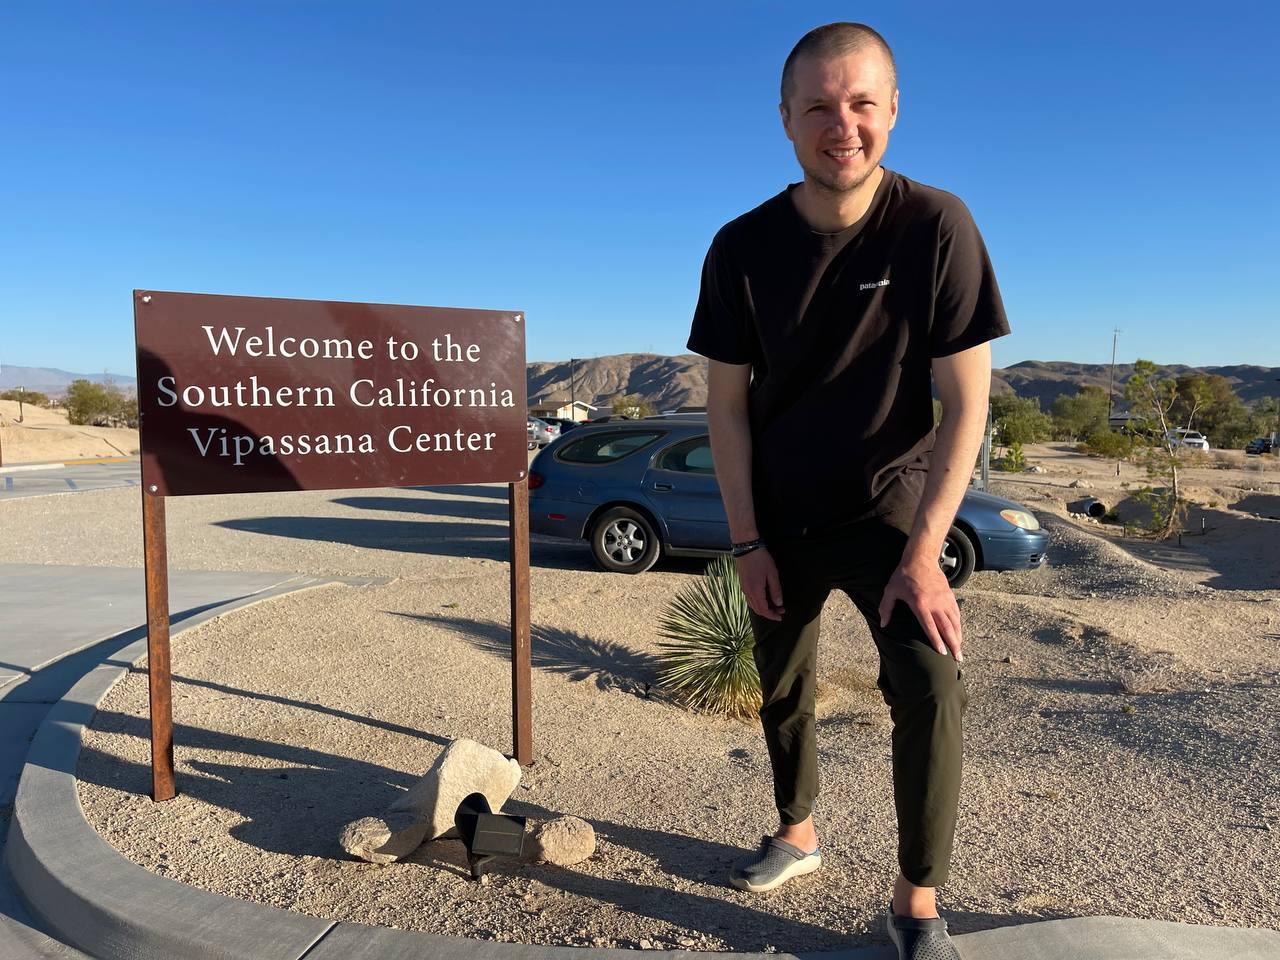 Vipassana experience.My journey to Silicon Valley as an entrepreneur